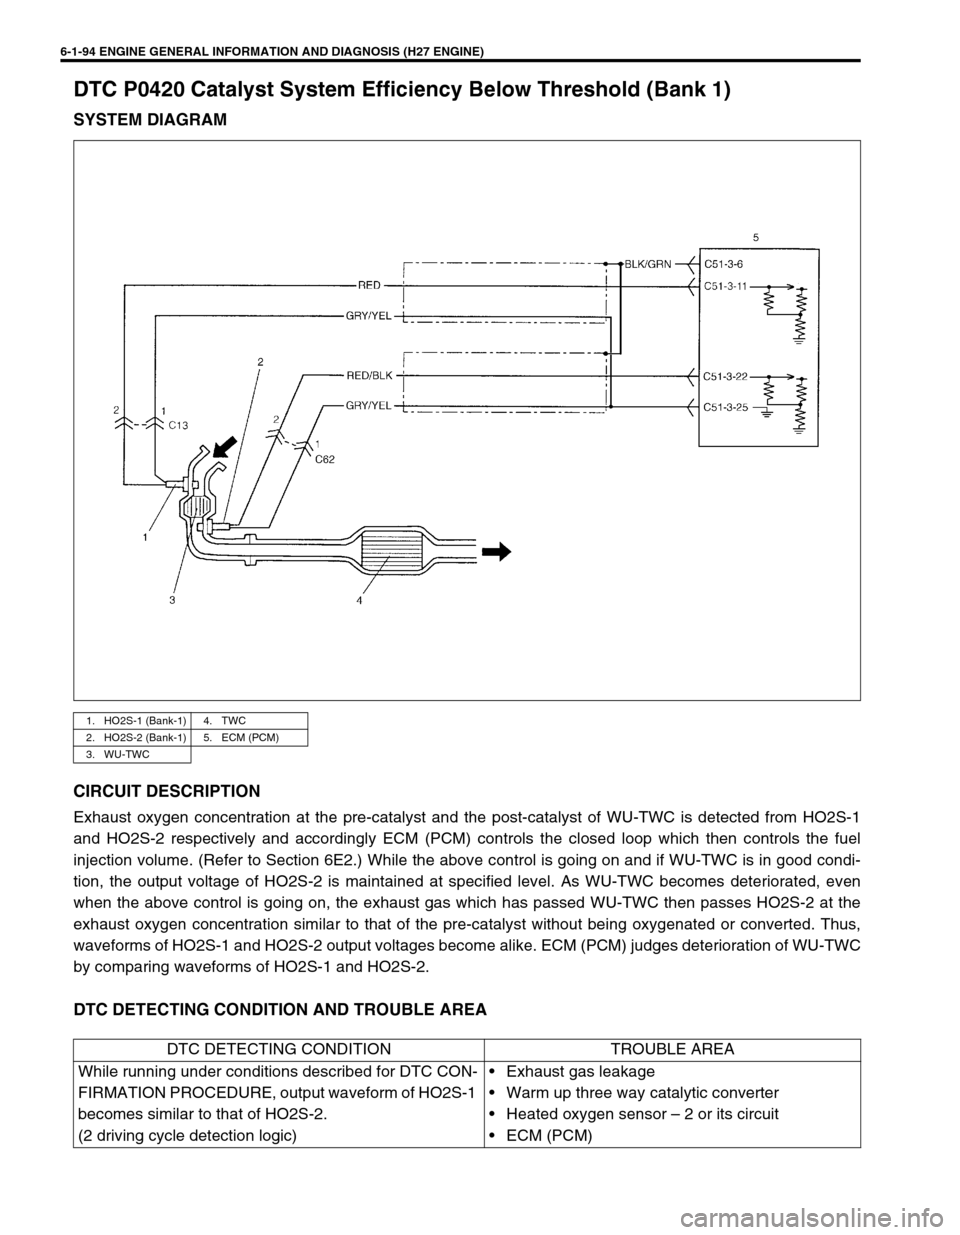 SUZUKI GRAND VITARA 2001 2.G Manual PDF 6-1-94 ENGINE GENERAL INFORMATION AND DIAGNOSIS (H27 ENGINE)
DTC P0420 Catalyst System Efficiency Below Threshold (Bank 1)
SYSTEM DIAGRAM
CIRCUIT DESCRIPTION
Exhaust oxygen concentration at the pre-ca